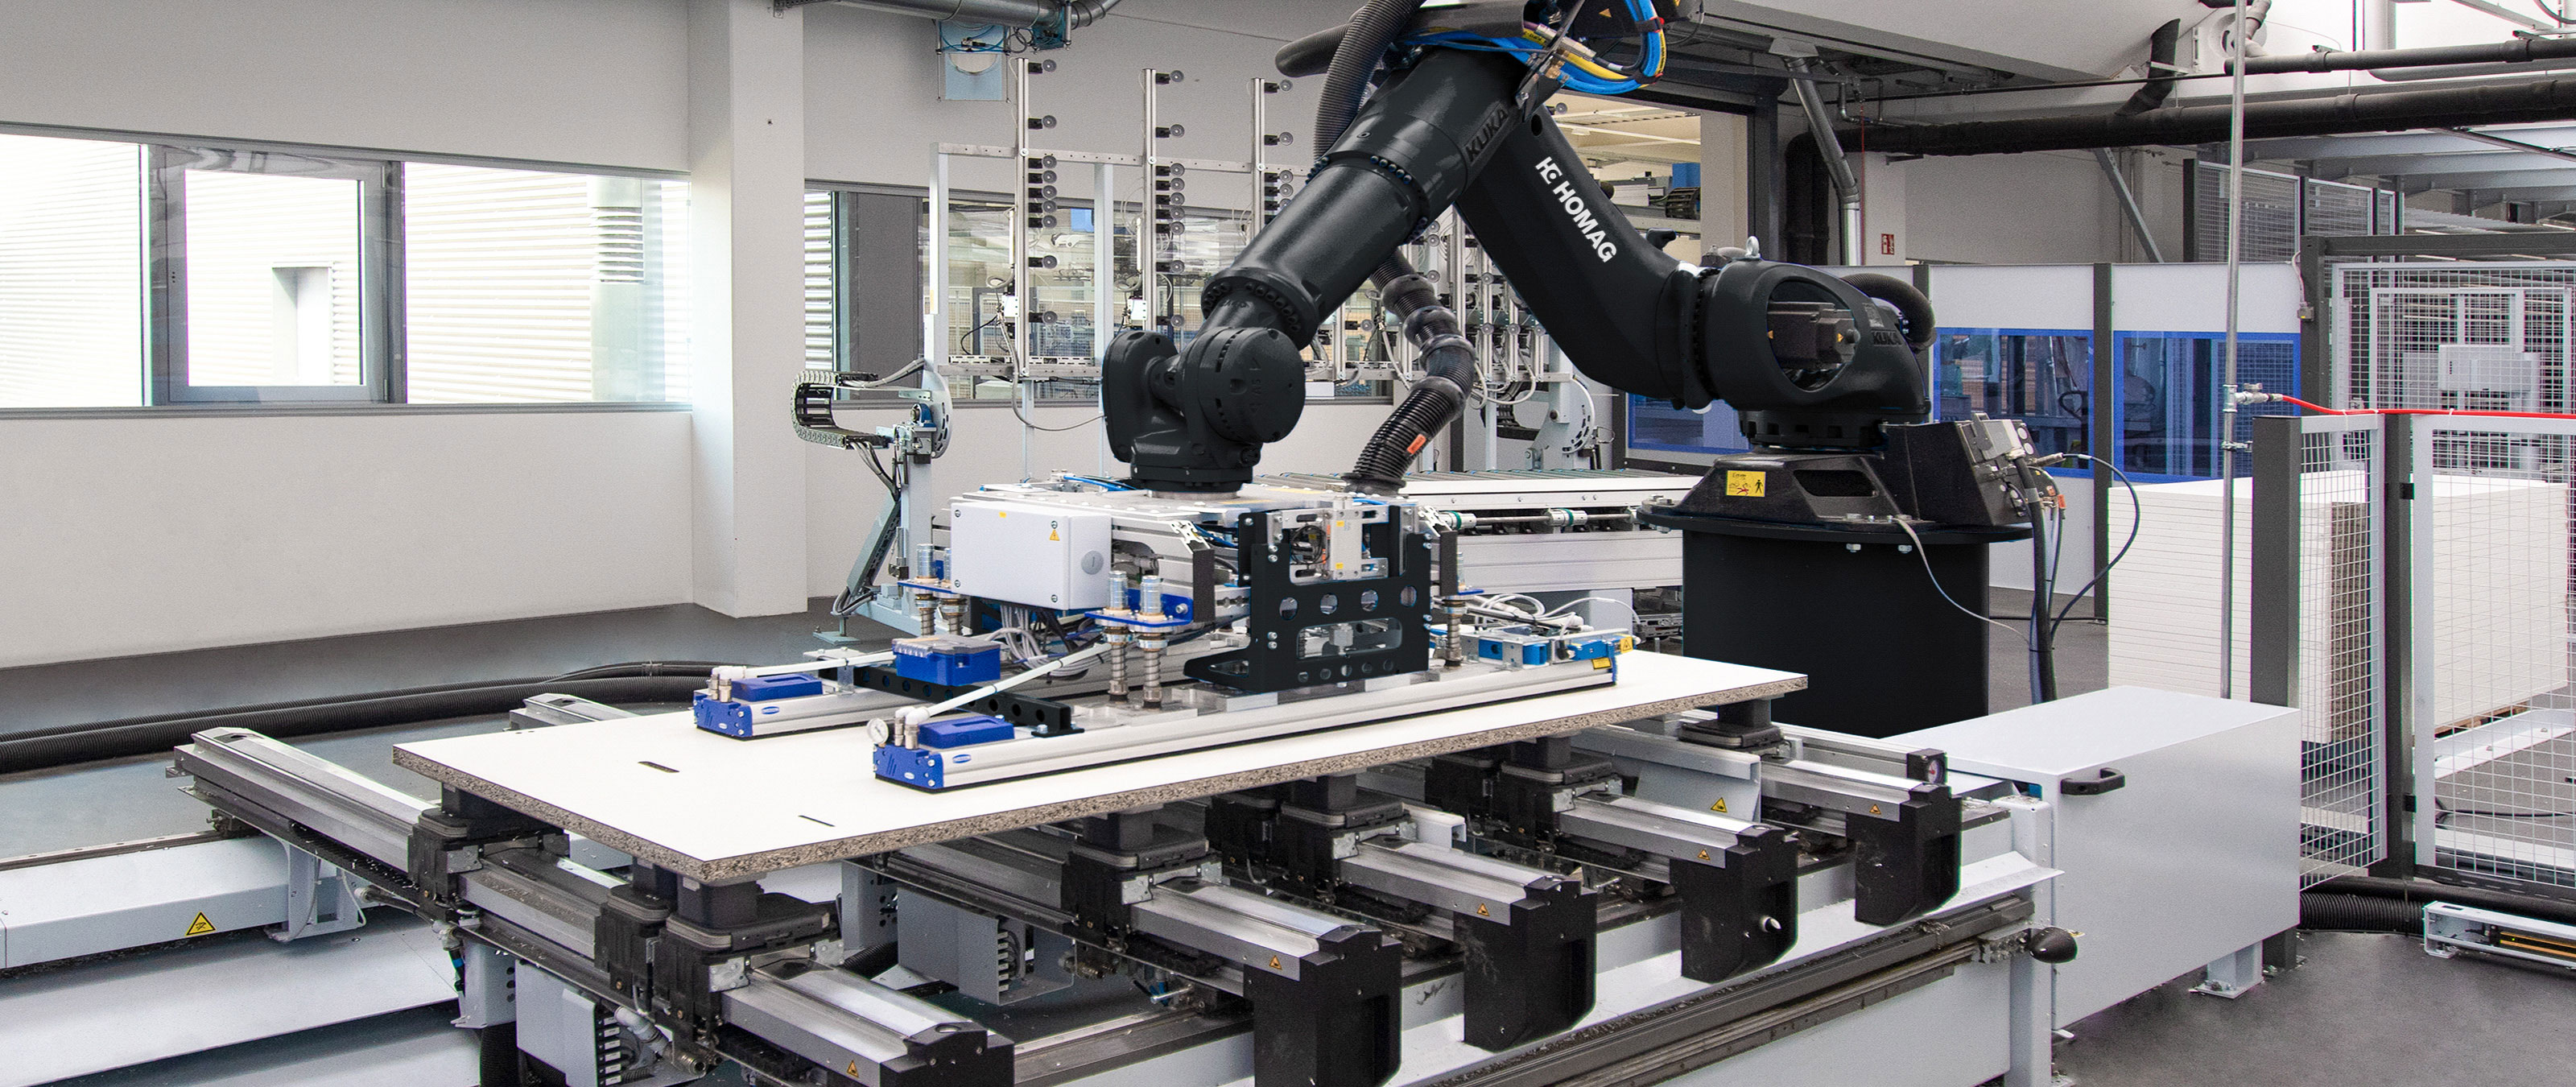 Robot management FEEDBOT on CNC processing centers | HOMAG